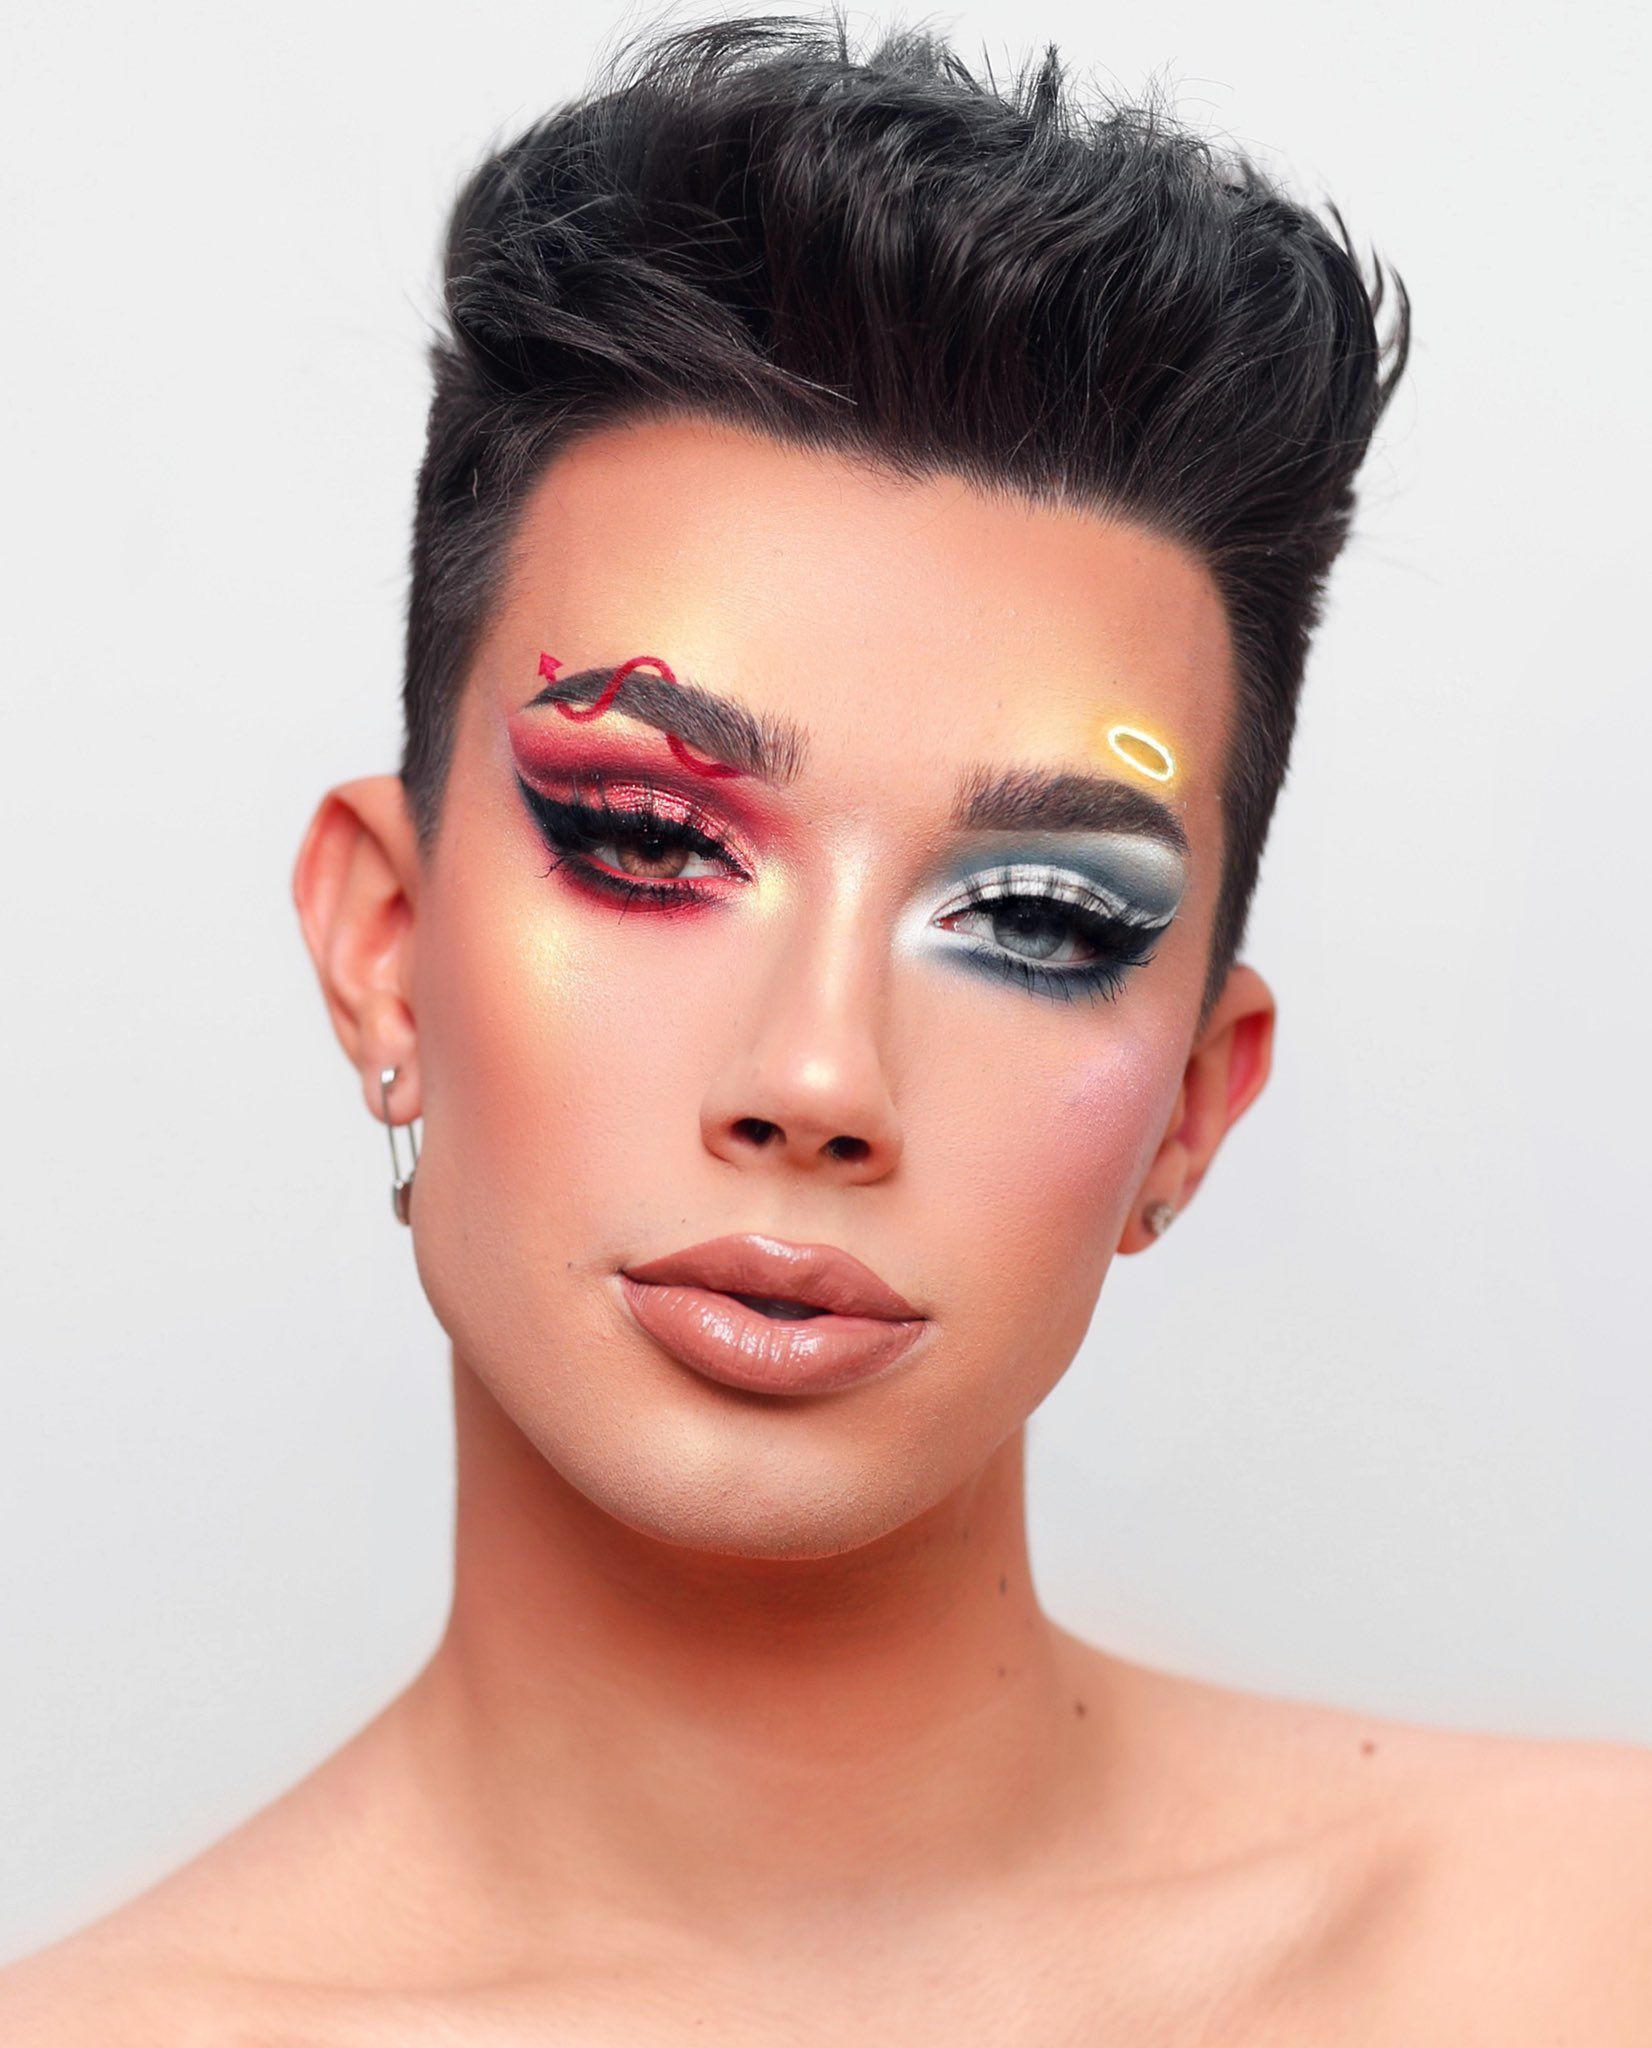 James Charles on Twitter - James Charles on Twitter -   17 beauty Boys makeup ideas